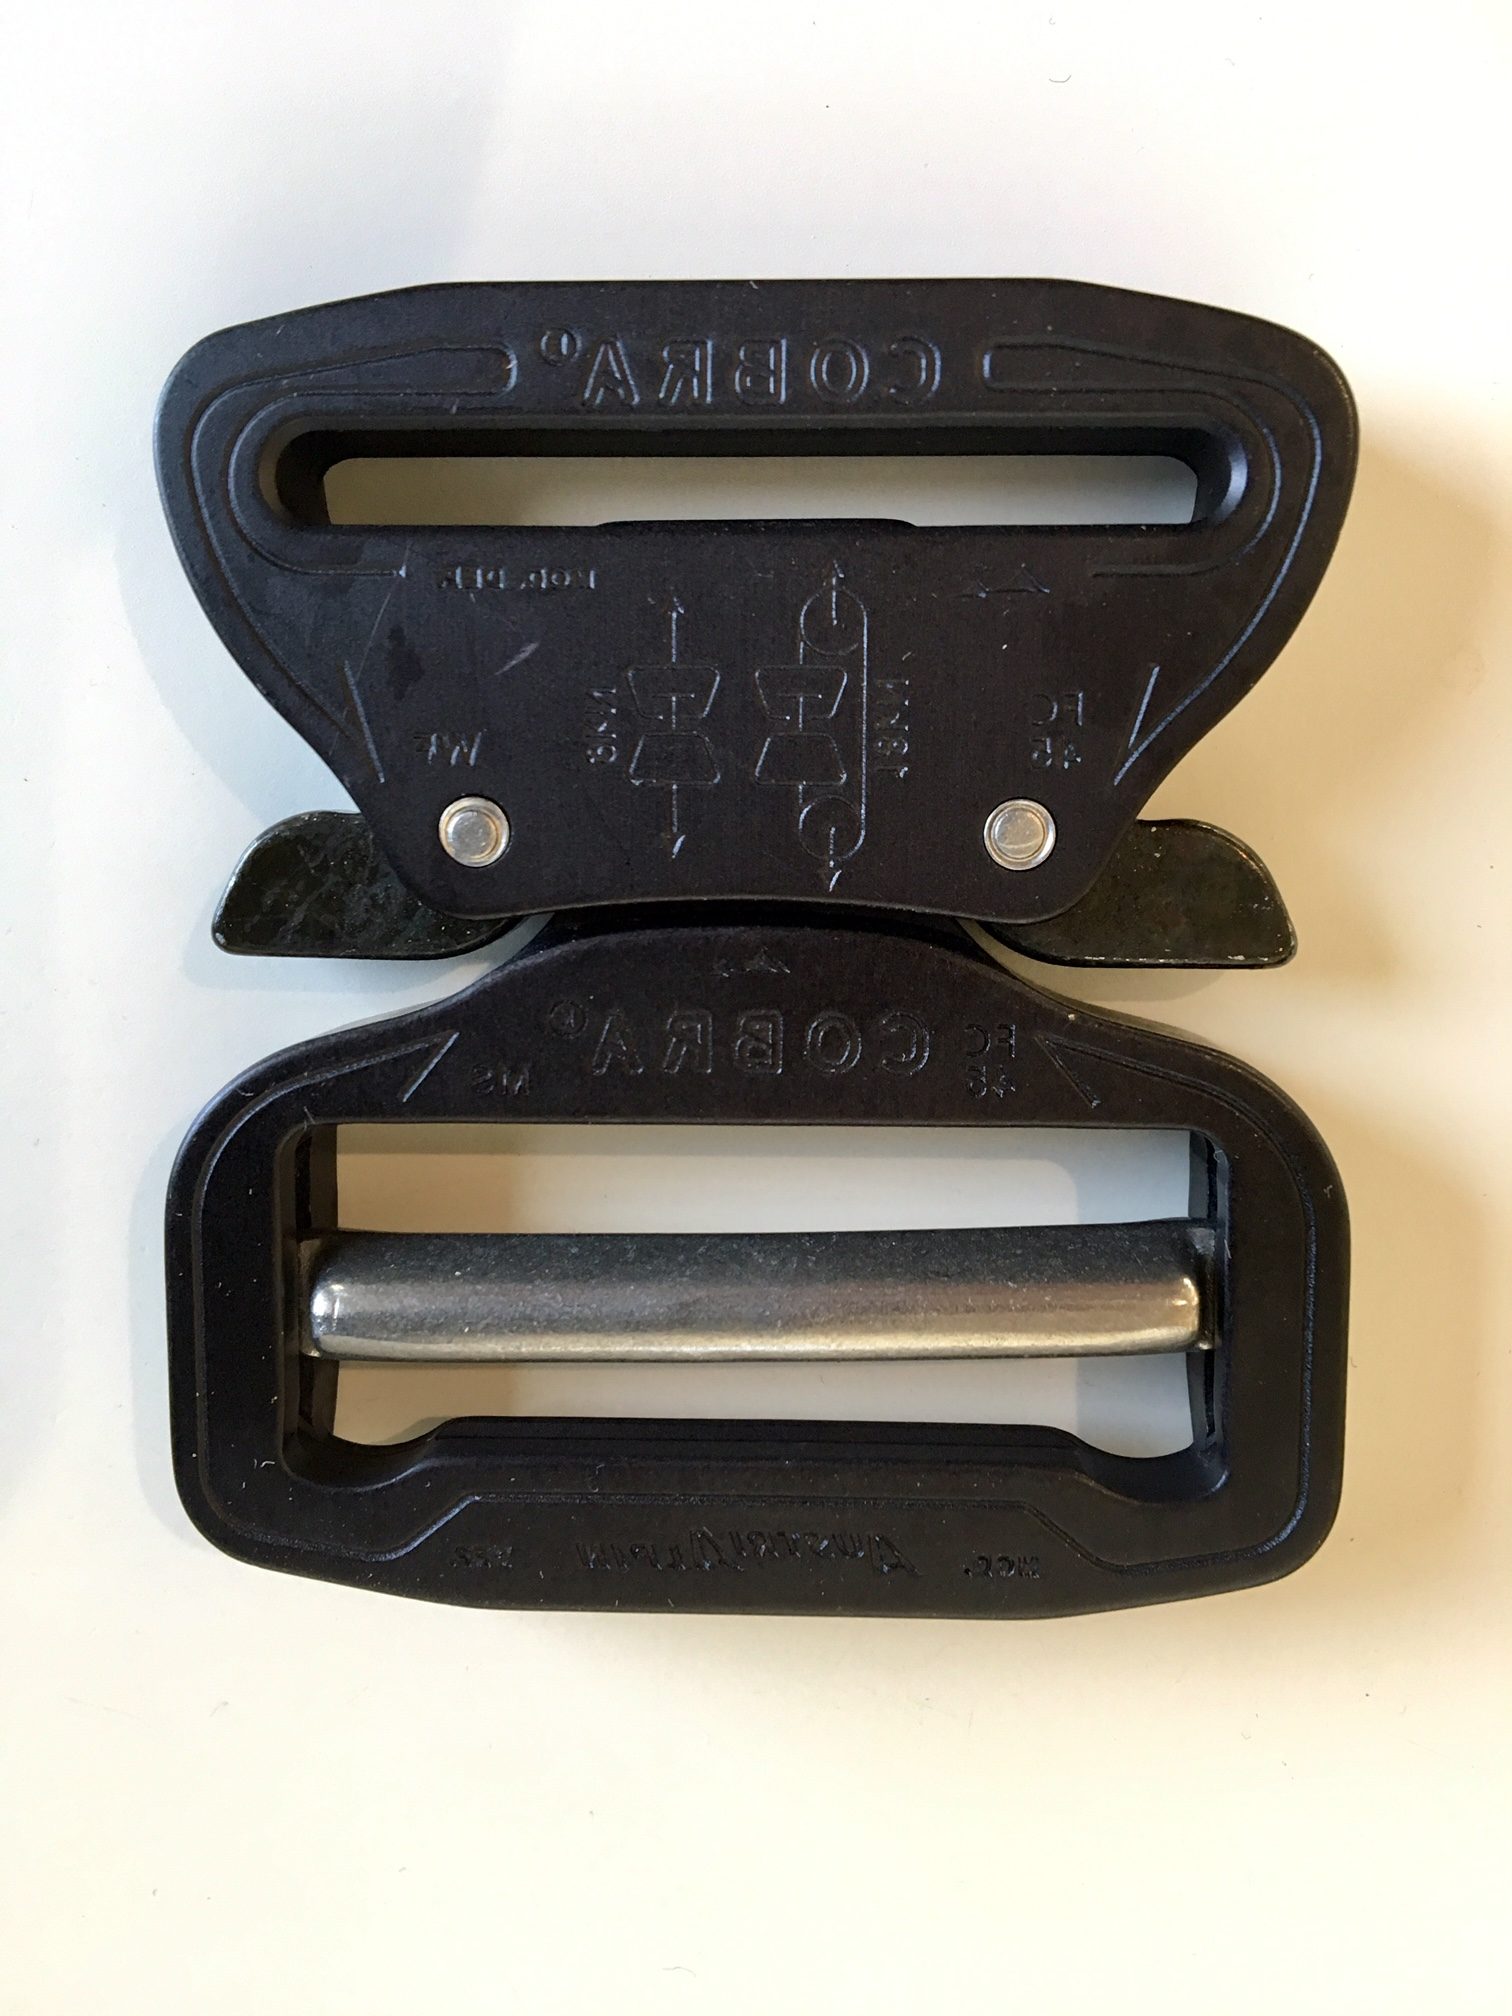 Aluminum Buckle COBRA® PRO STYLE with Double-side Metal Tri-glide